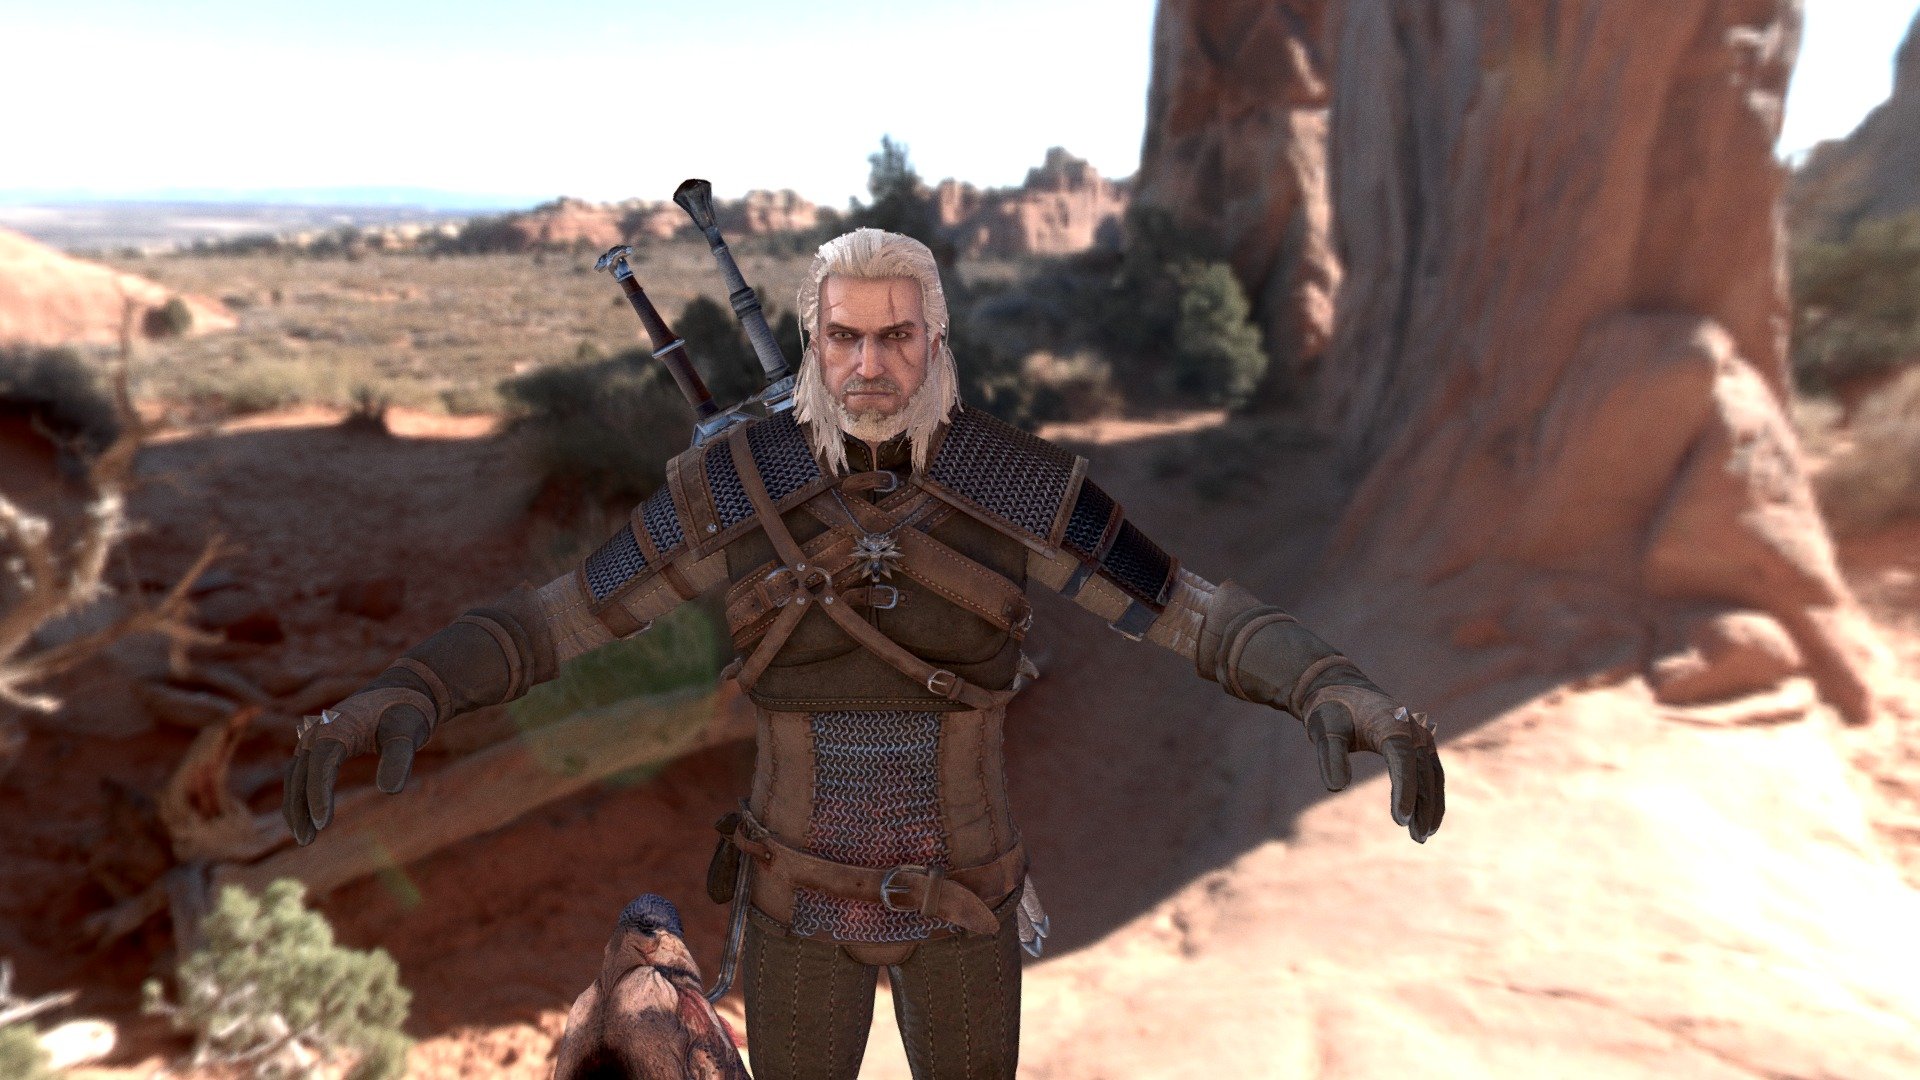 Geralt Of Rivia with 4k res textures extended. Here are jpg file extensions, but can send png full quality 3d model